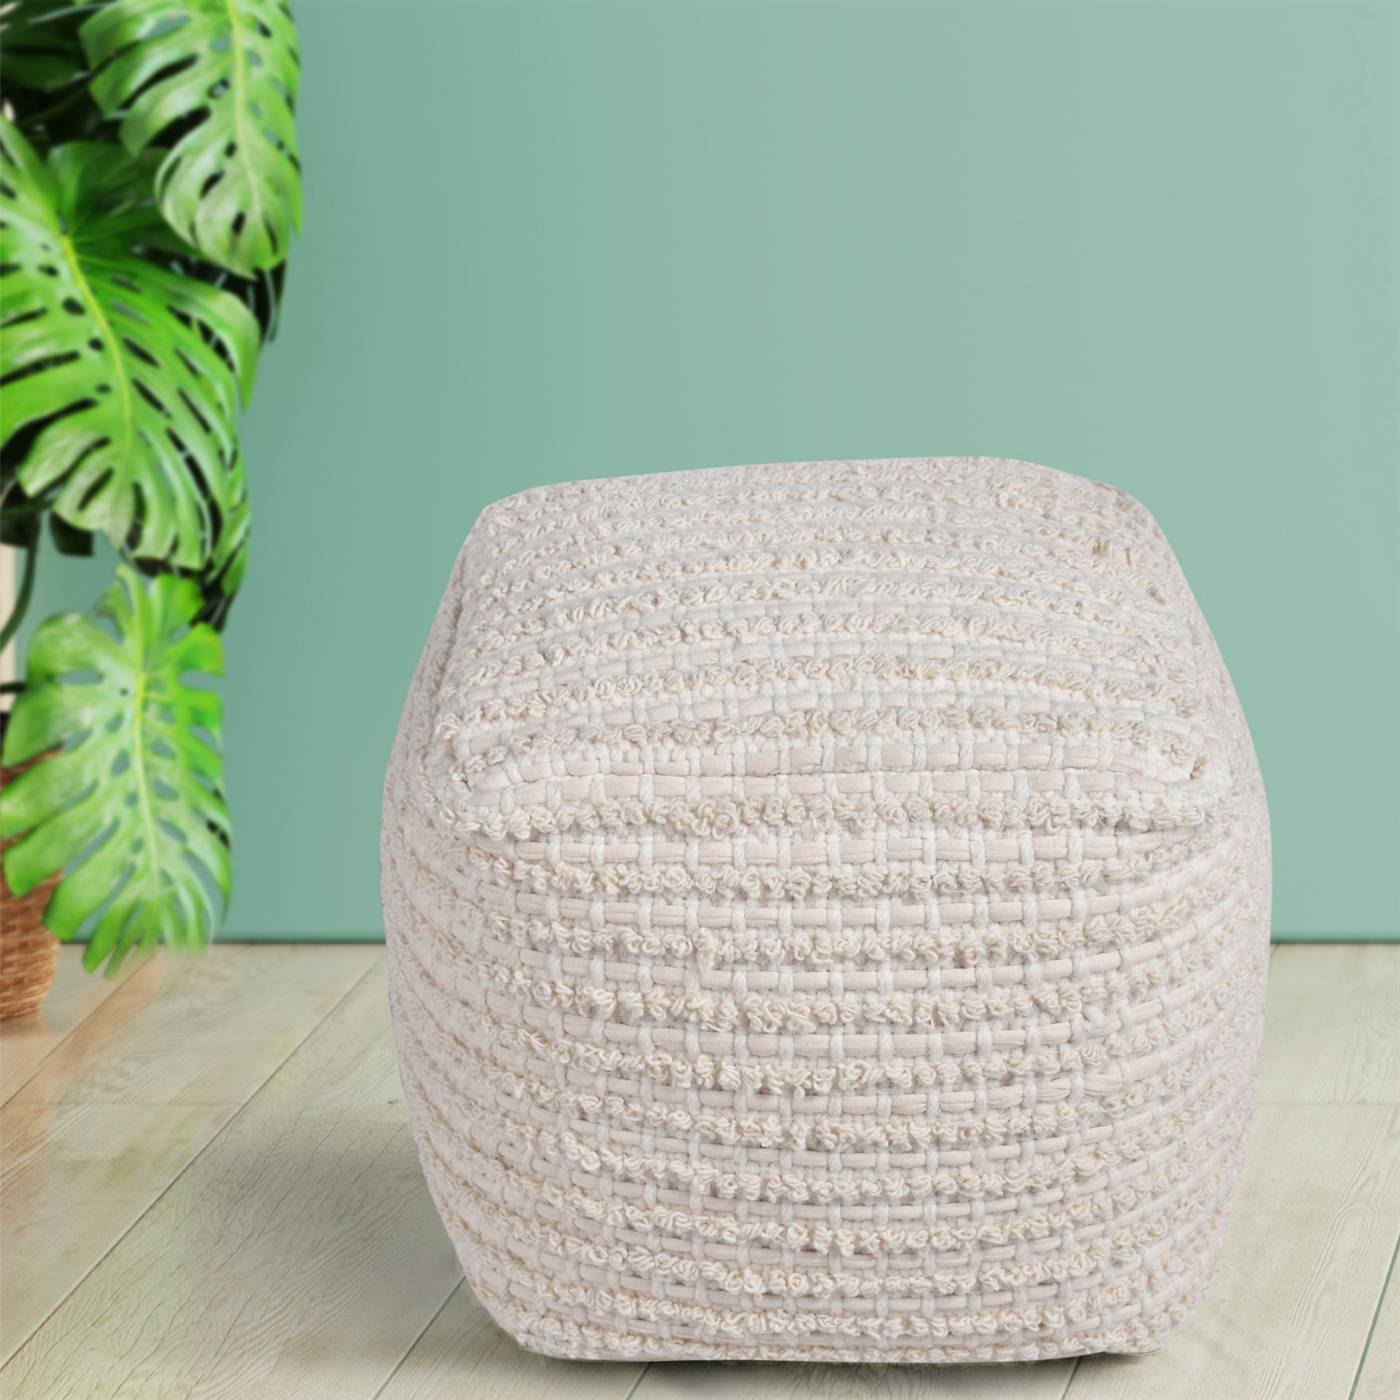 Adonis Pouf, 40x40x40 cm, Natural White, Wool, Cotton, Hand Woven, Pitloom, All Loop